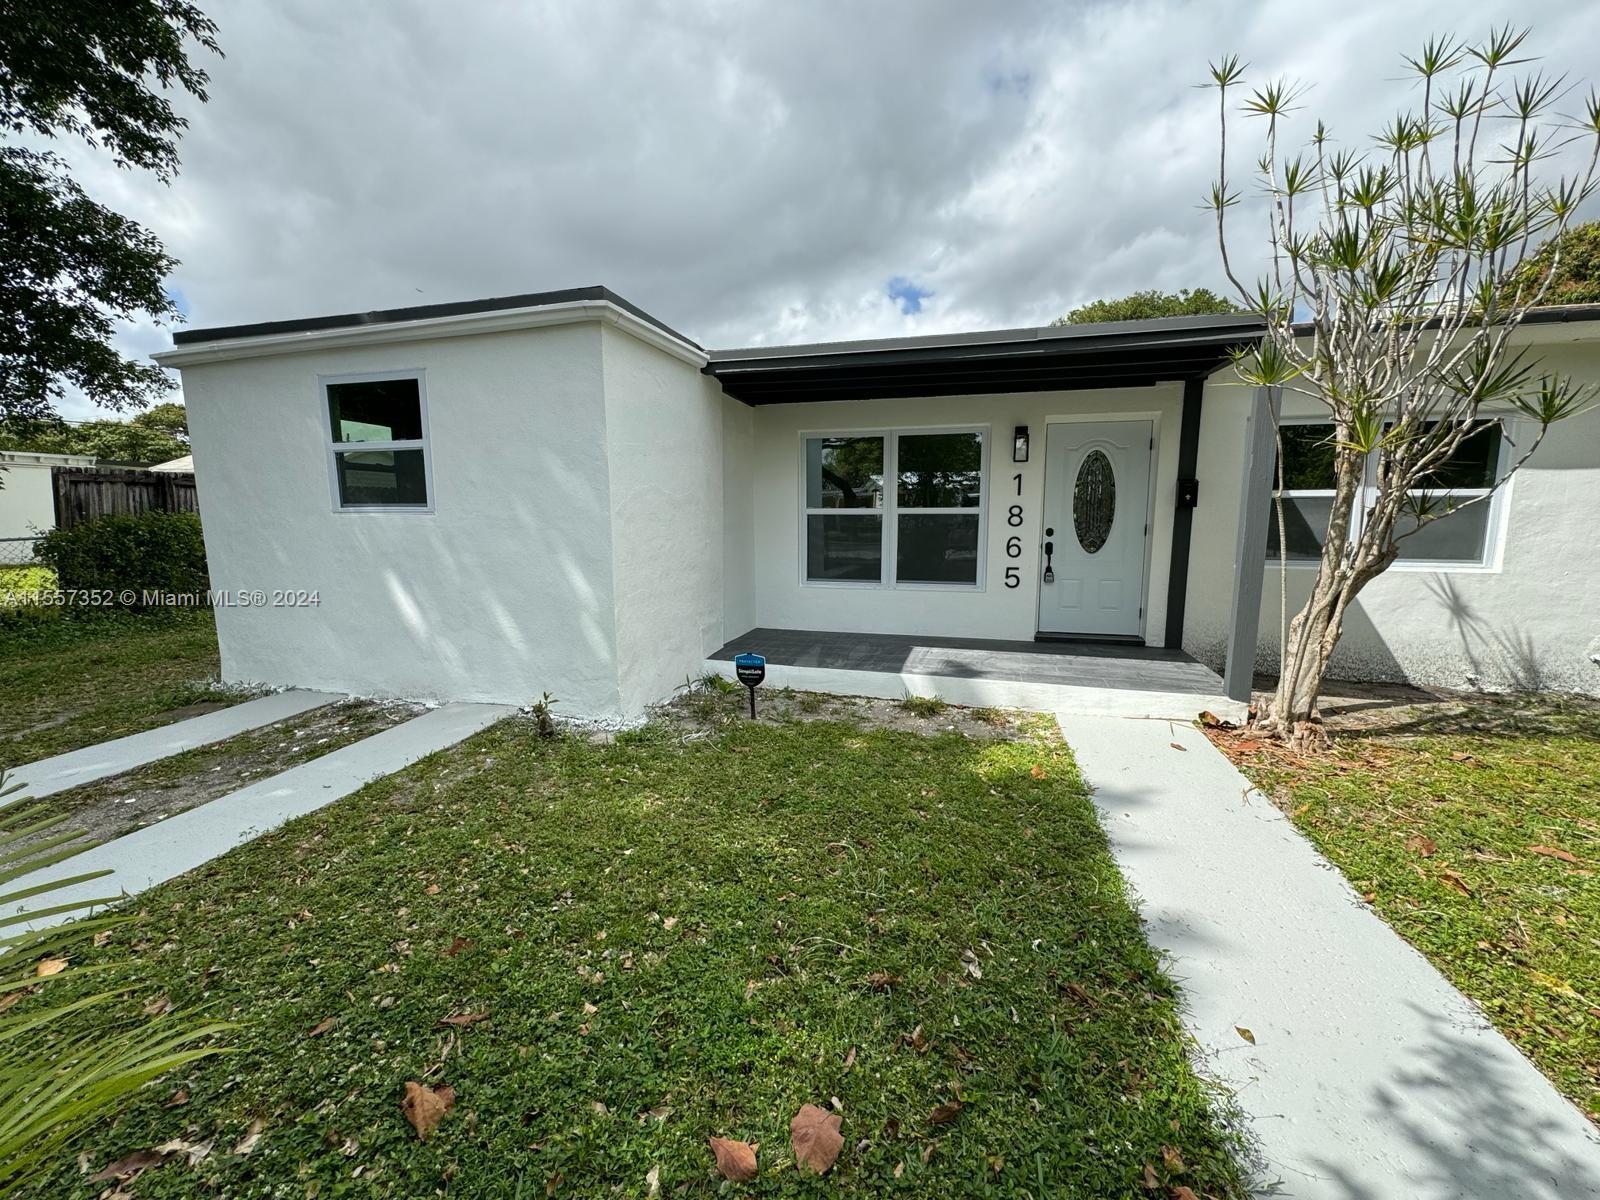 Photo of 1865 NW 131st St in Miami, FL